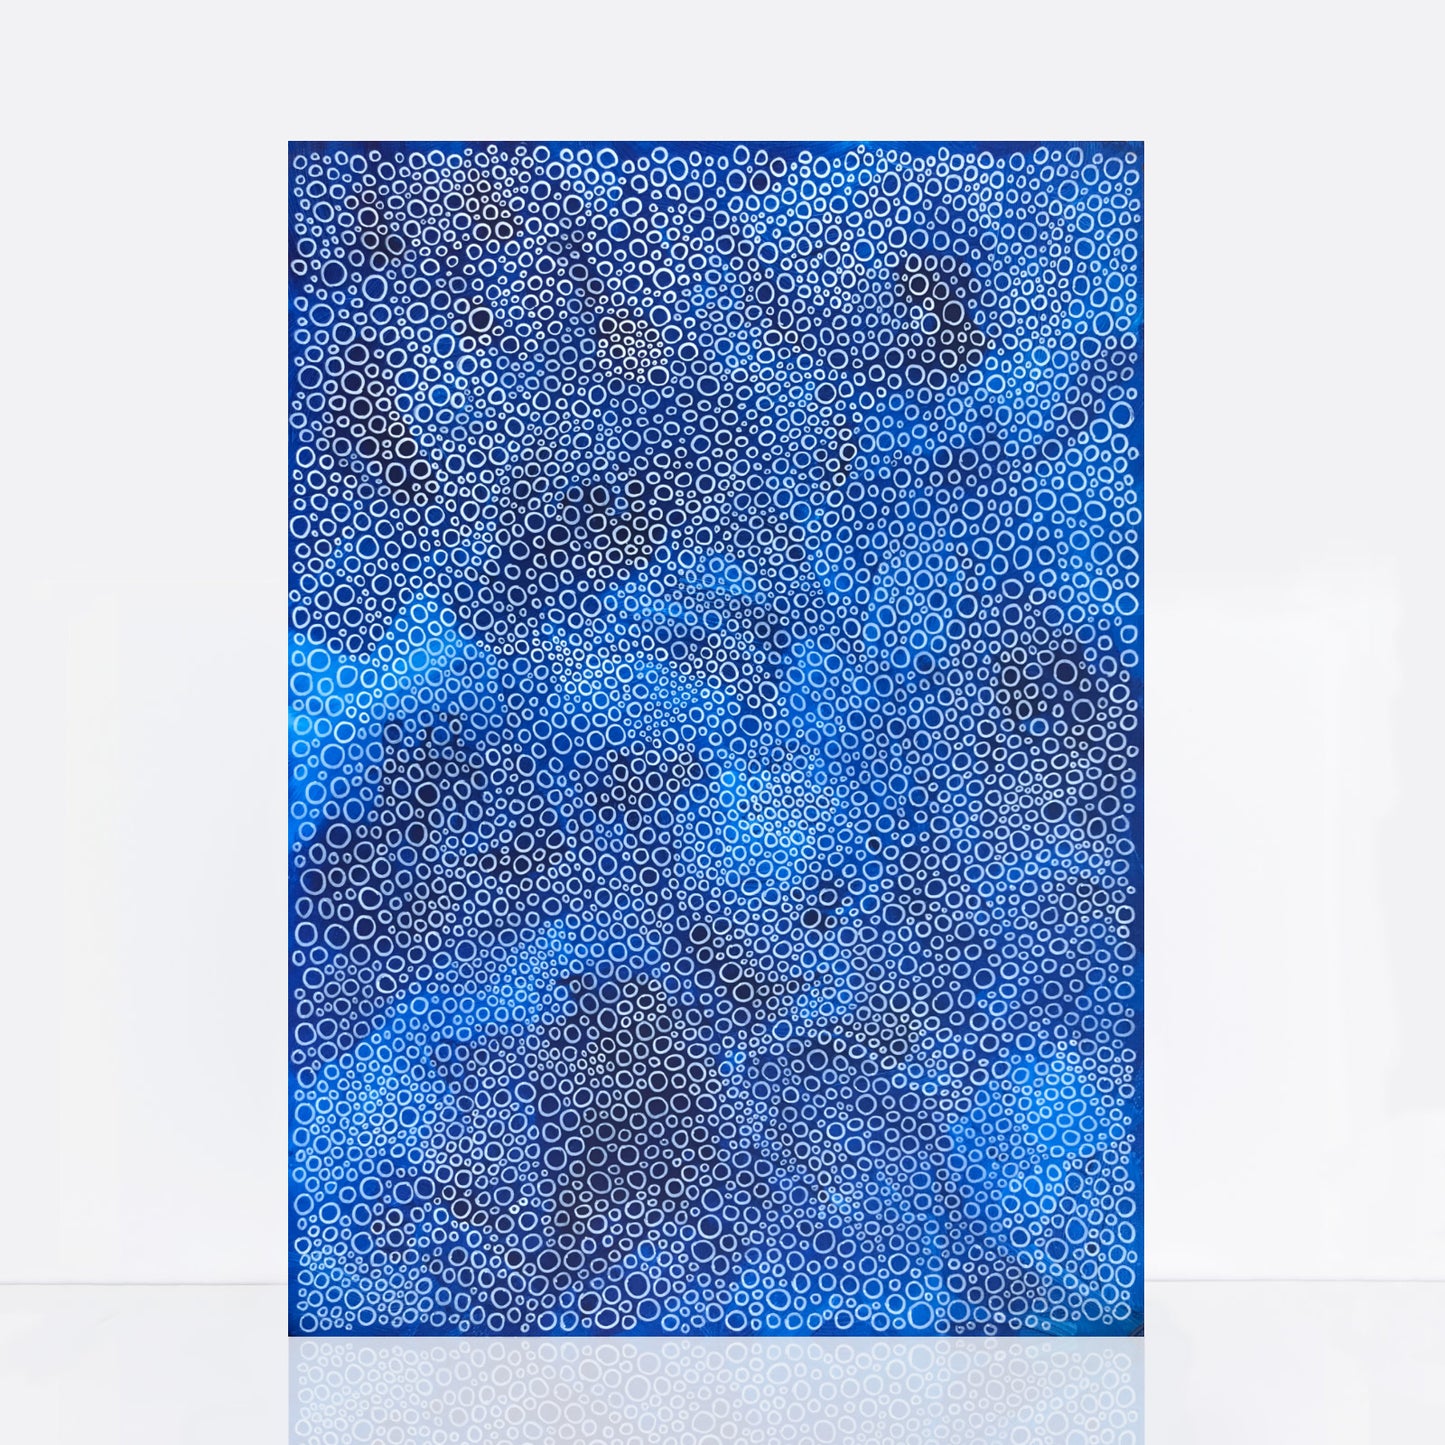 blue artwork features a rich blue background with intricate white circles of varying sizes that resemble sea bubbles and foam